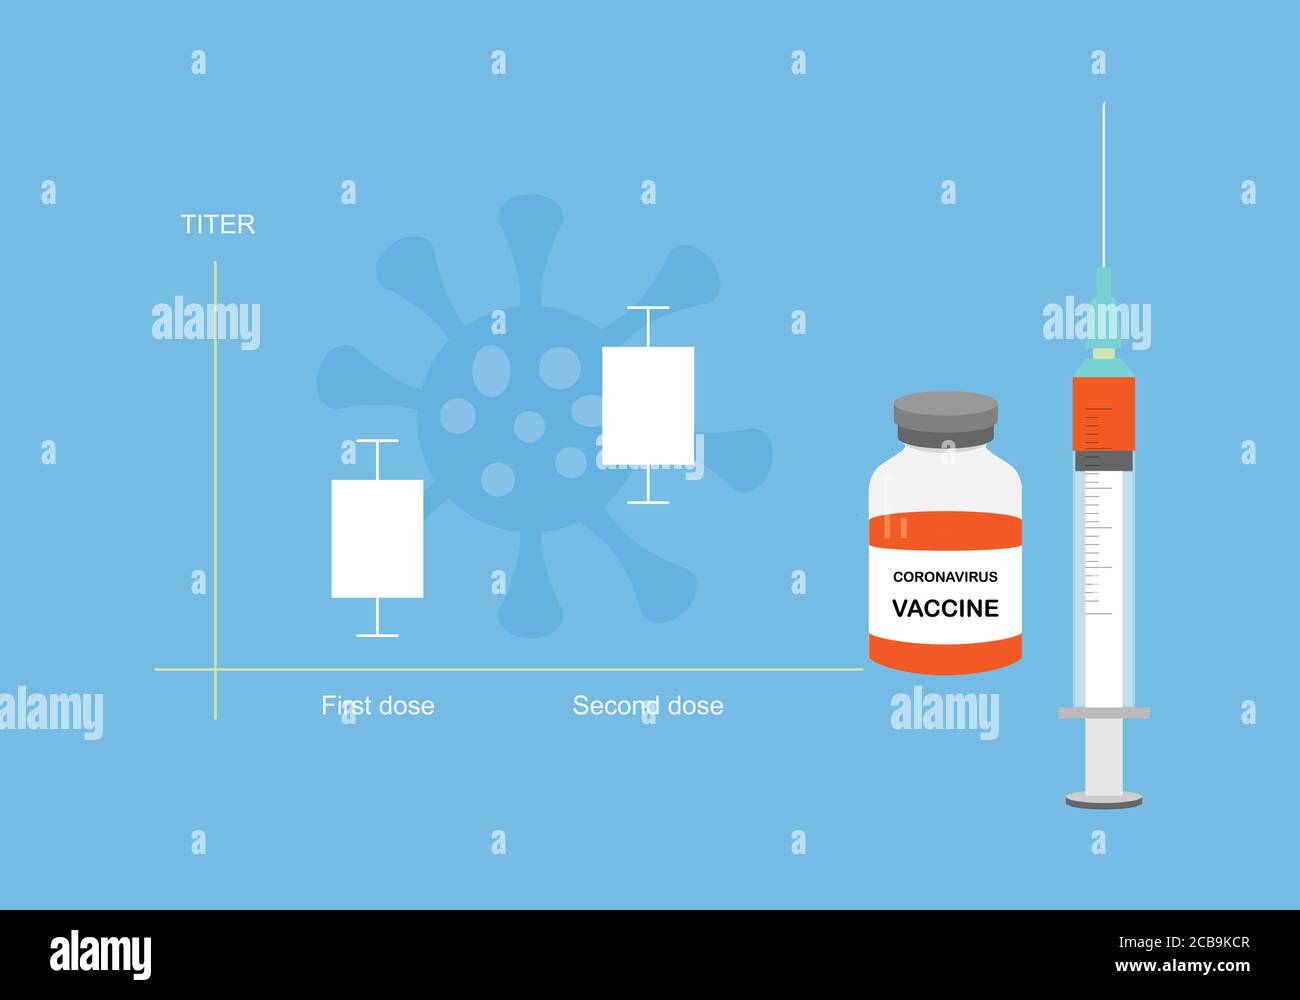 Concepts of coronavirus or covid-19 vaccine and antibody titer. Titer increasing after second injection. Illustration of syringe, vaccine bottle and g Stock Vector